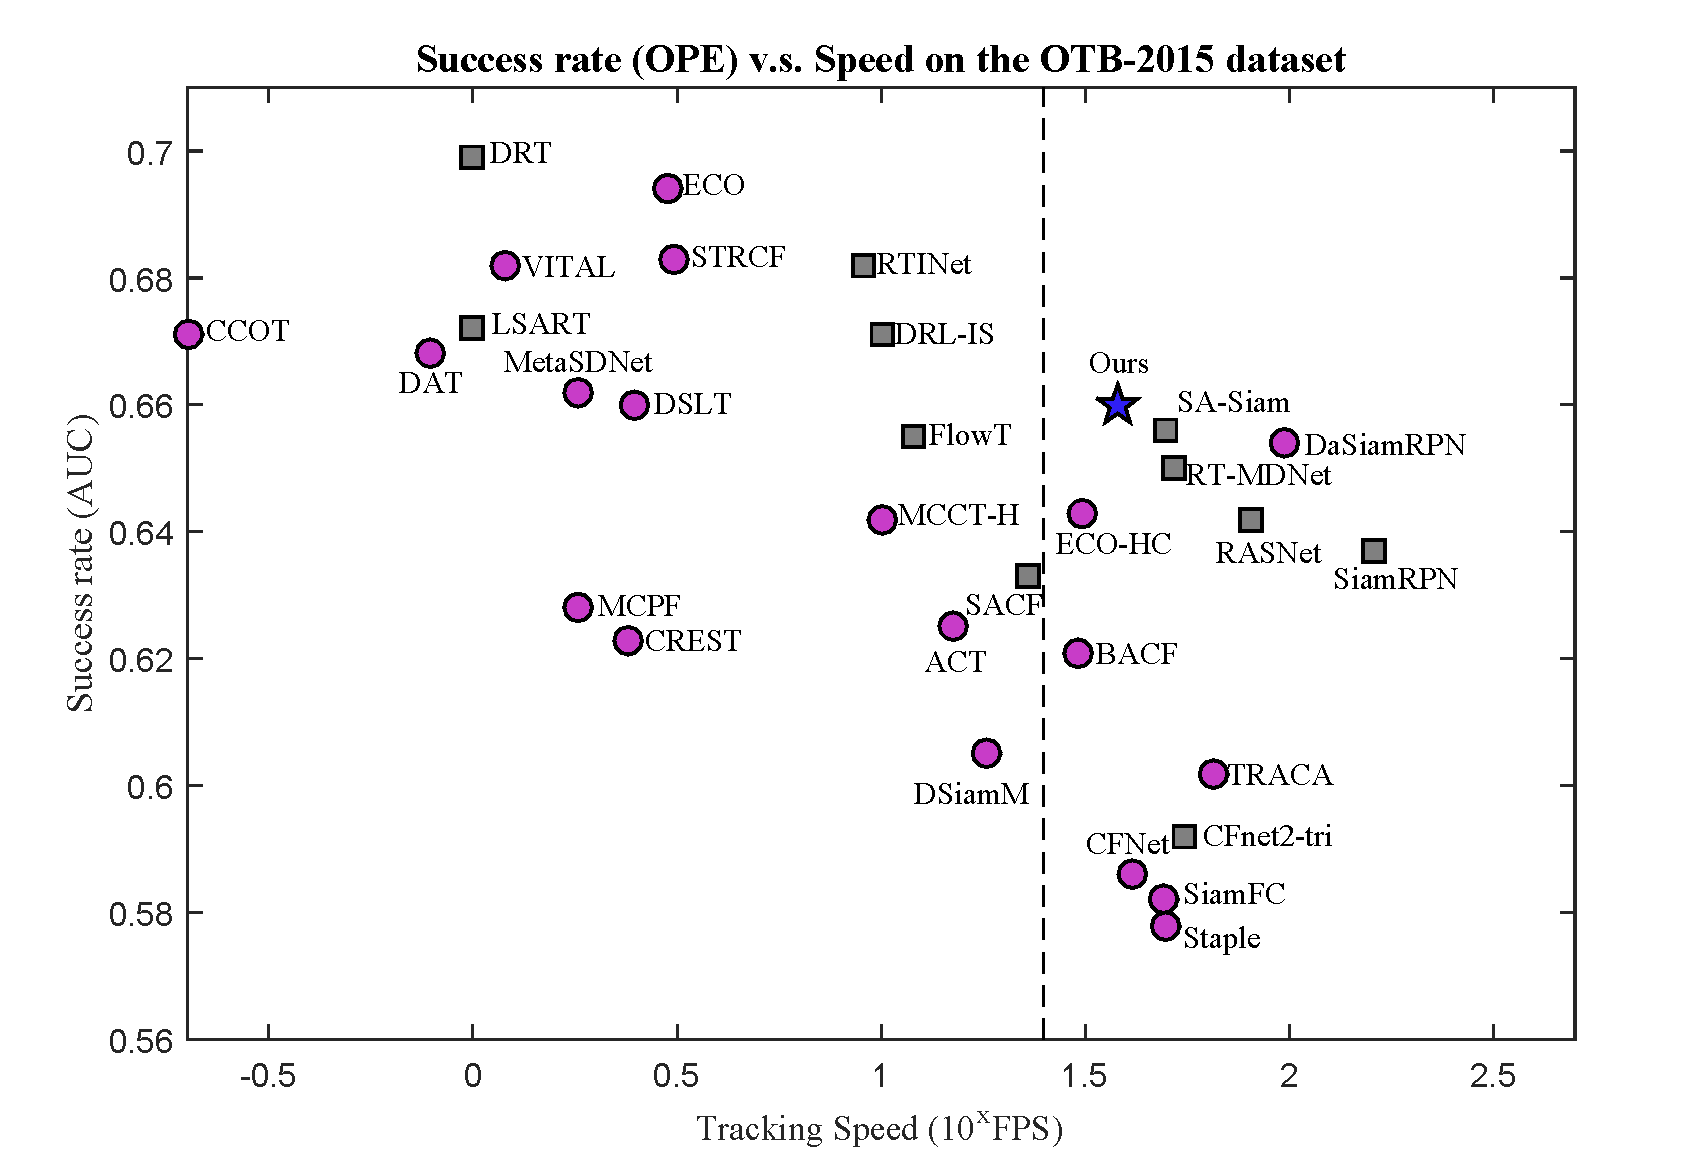 Tracking accuracy vs. speed on the OTB-2015 dataset.